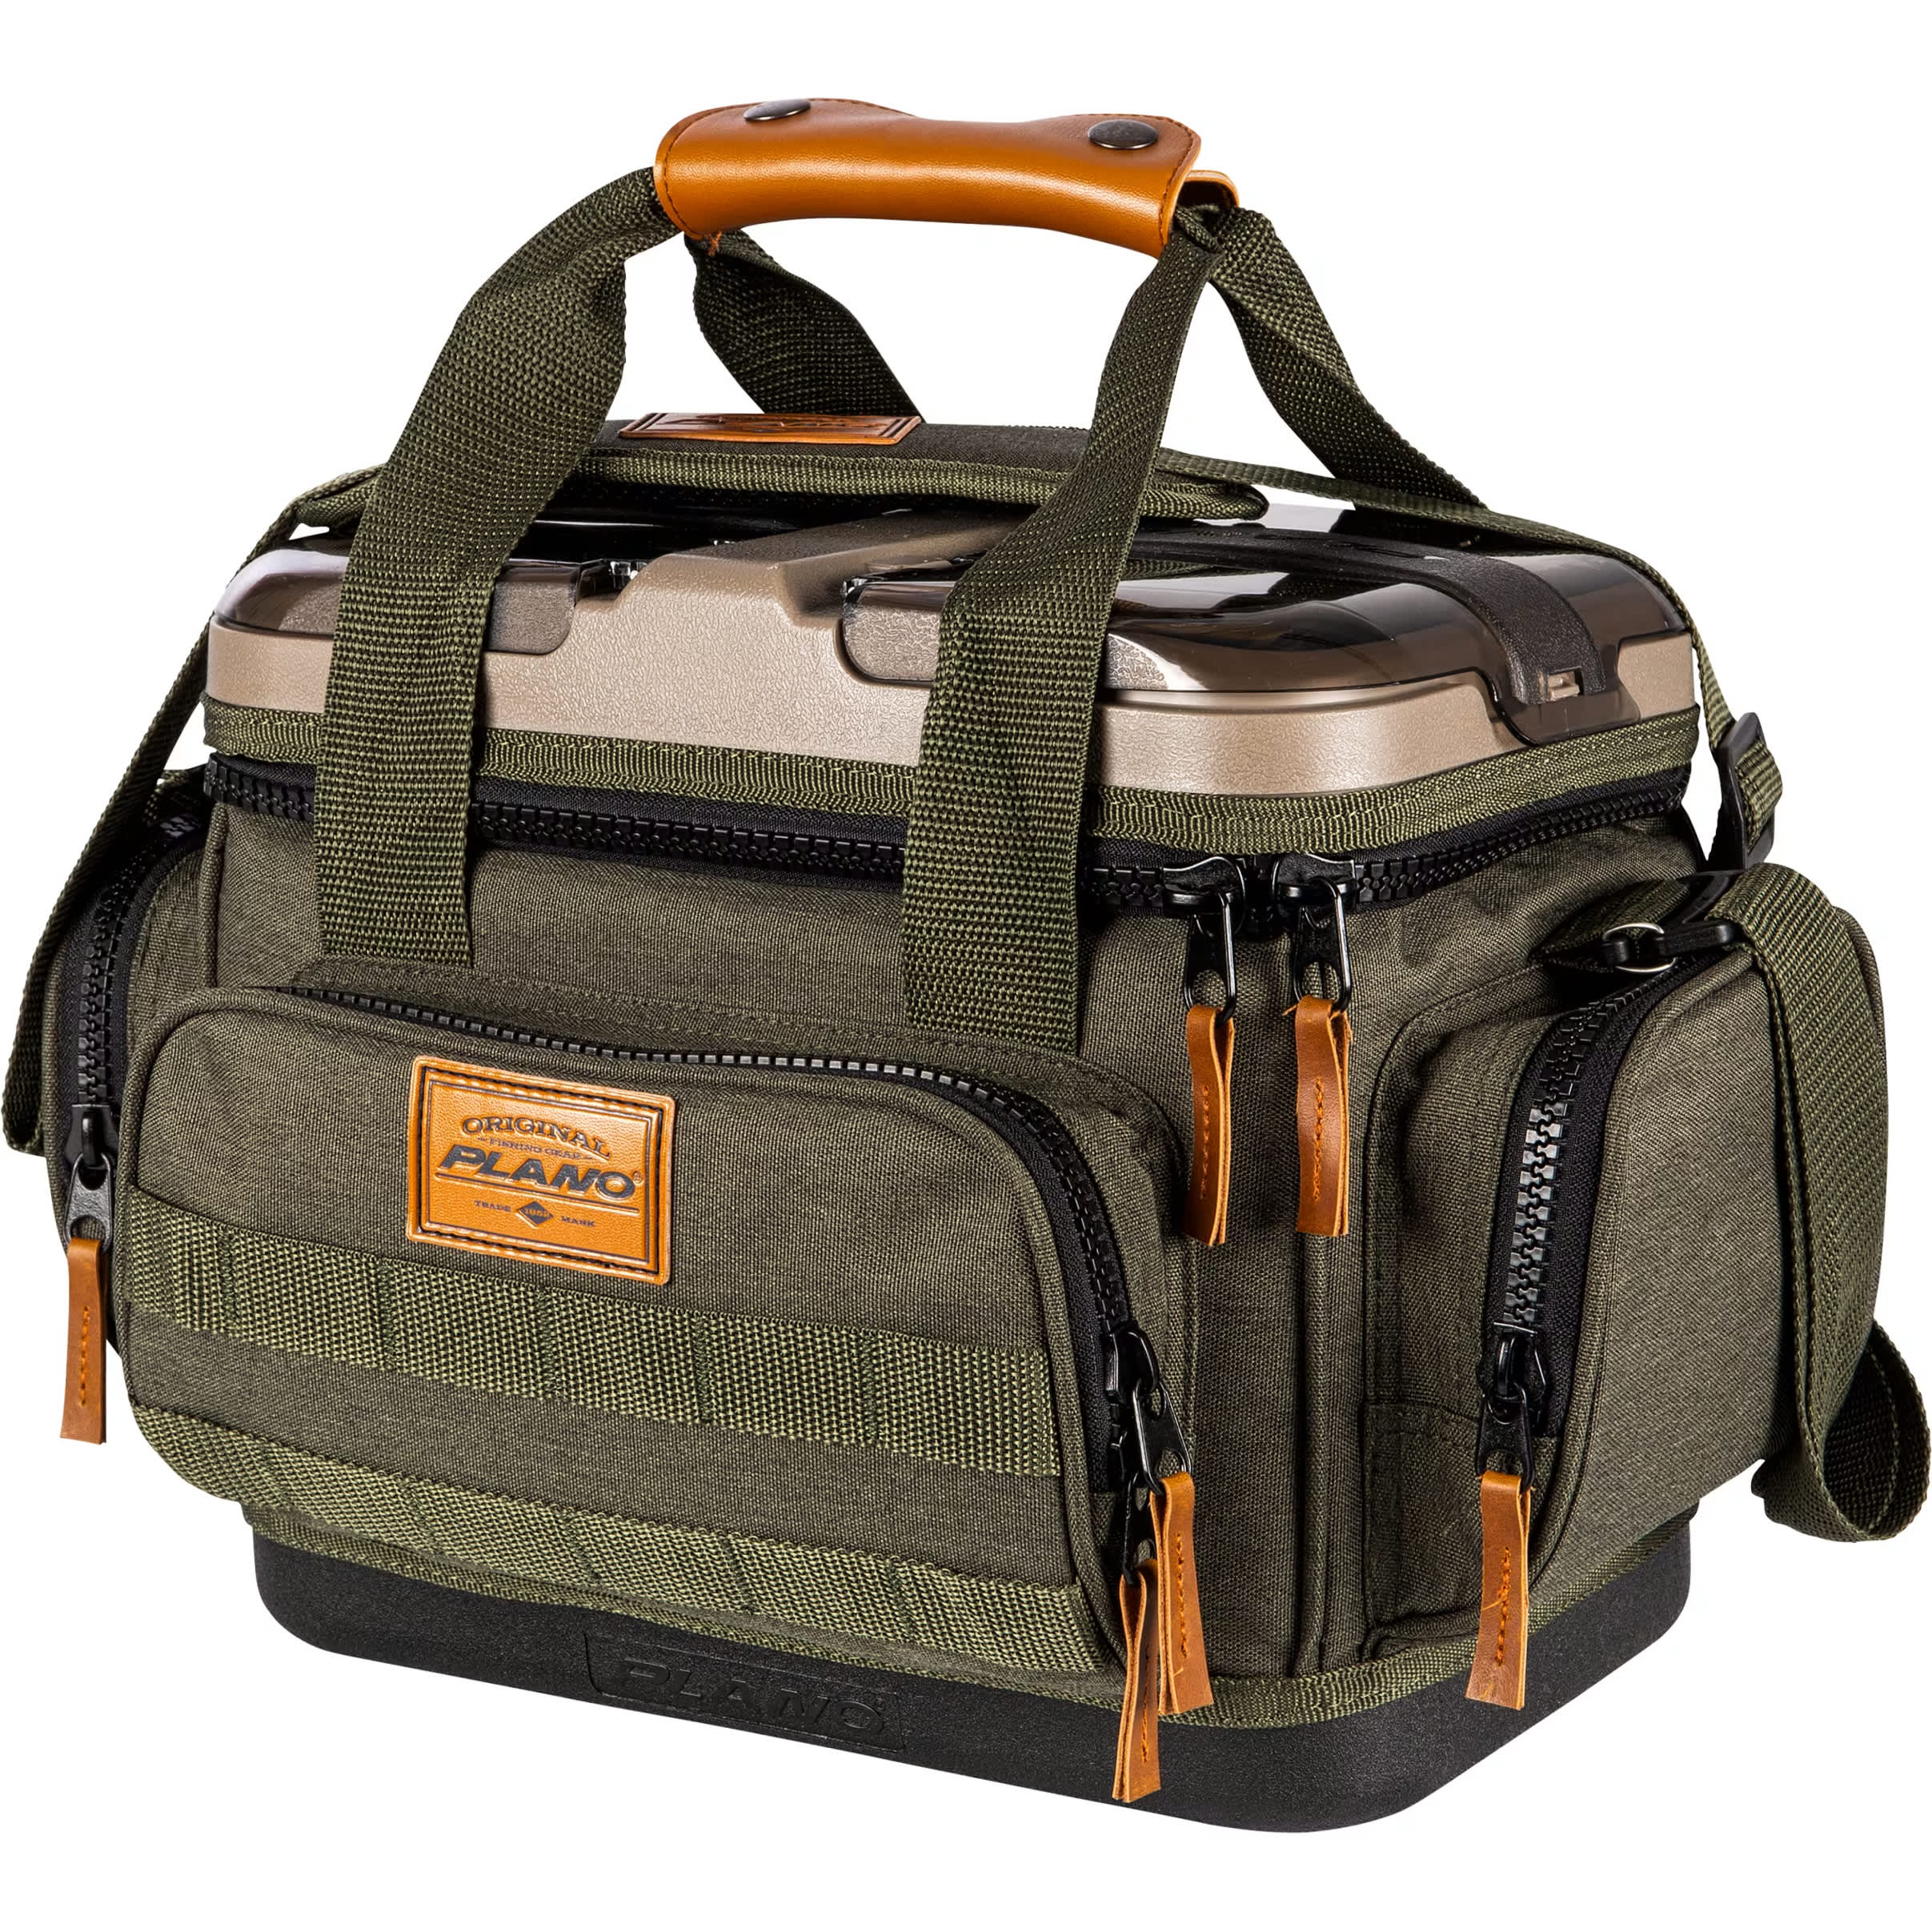 plano fishing bag, plano fishing bag Suppliers and Manufacturers at